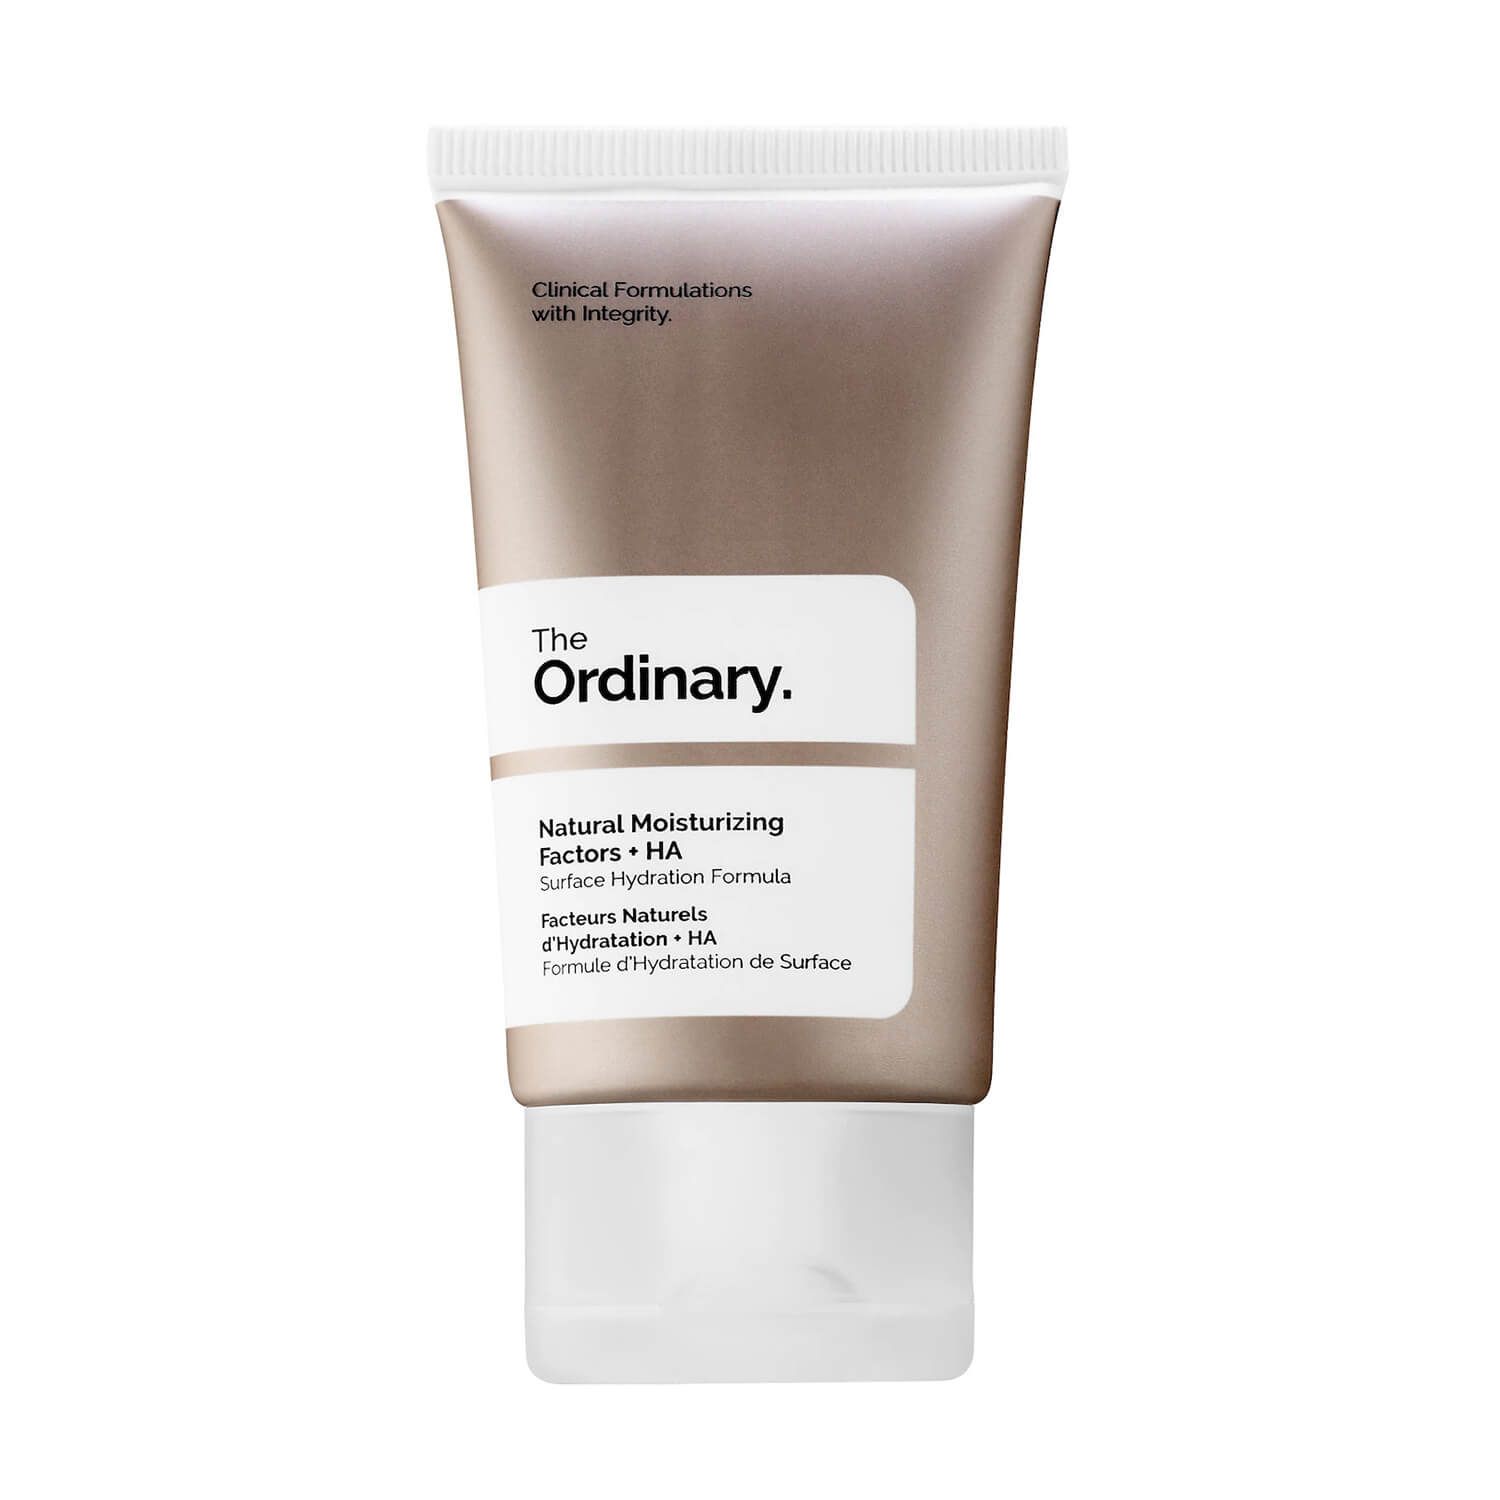 buy the ordinary moisturizing factors at heygirl.pk for delivery in pakistan